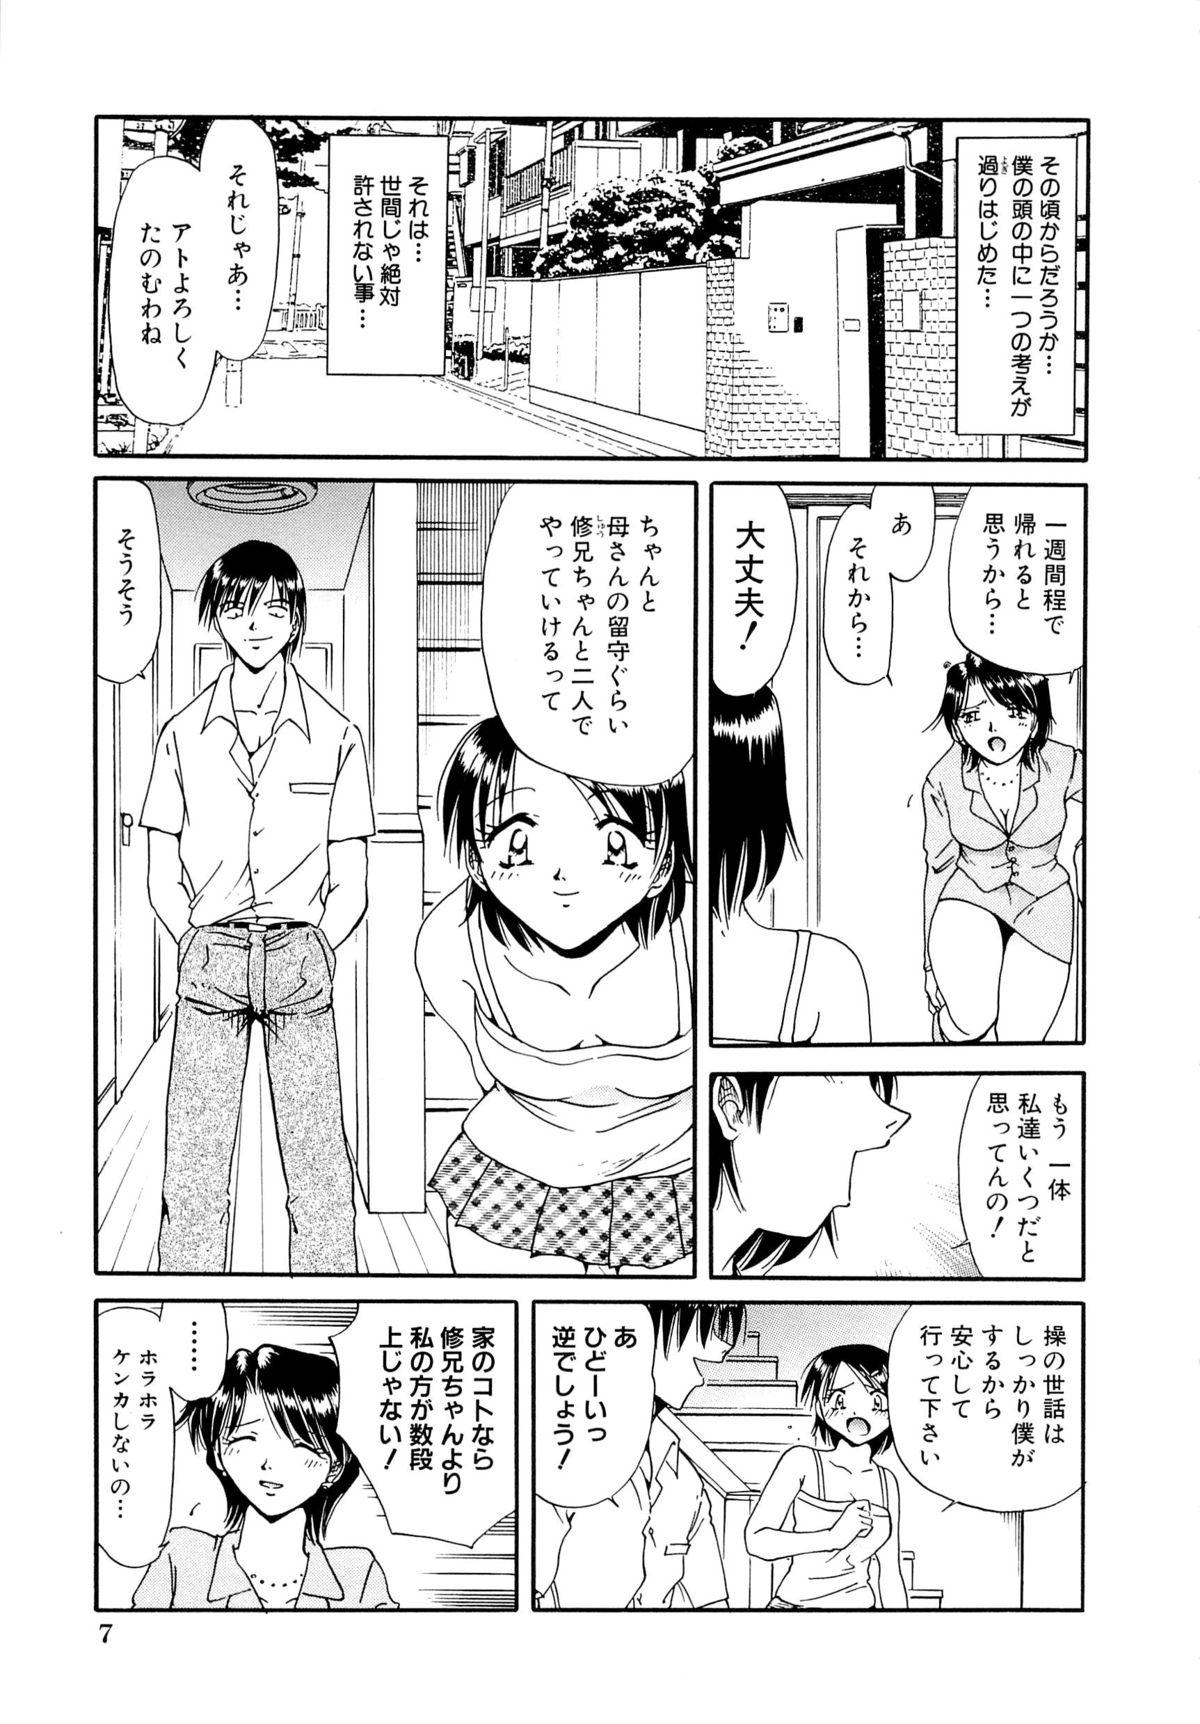 Missionary Porn Gokuchuu Soukan - Have Sexual Intercourse In Jail Tats - Page 10